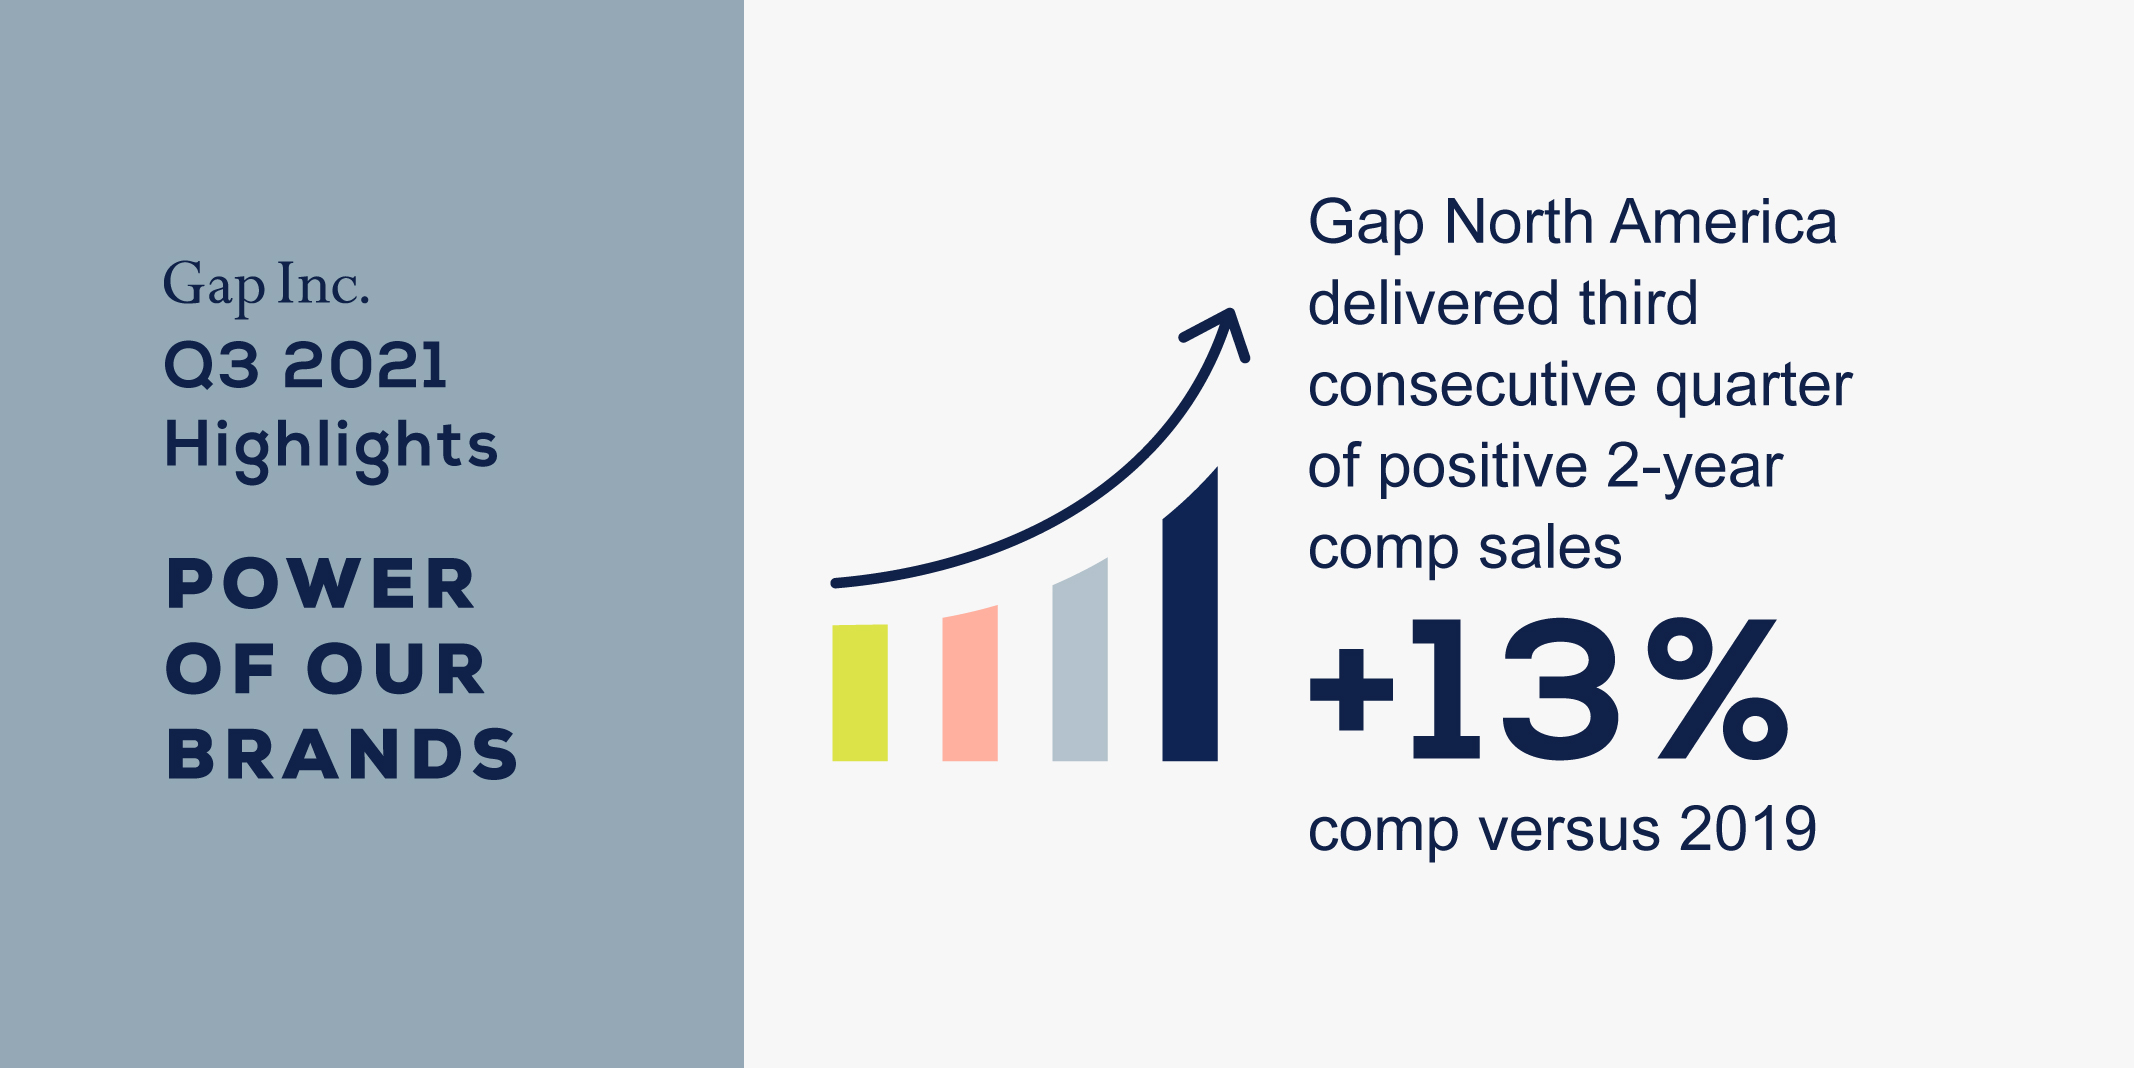 Gap Inc. Twitter: "Our #GapInc Q3 2021 #Earnings call has concluded. For information, our Investor site: https://t.co/DTzKxxPnGt. $GPS https://t.co/BP3rvwJH24" Twitter